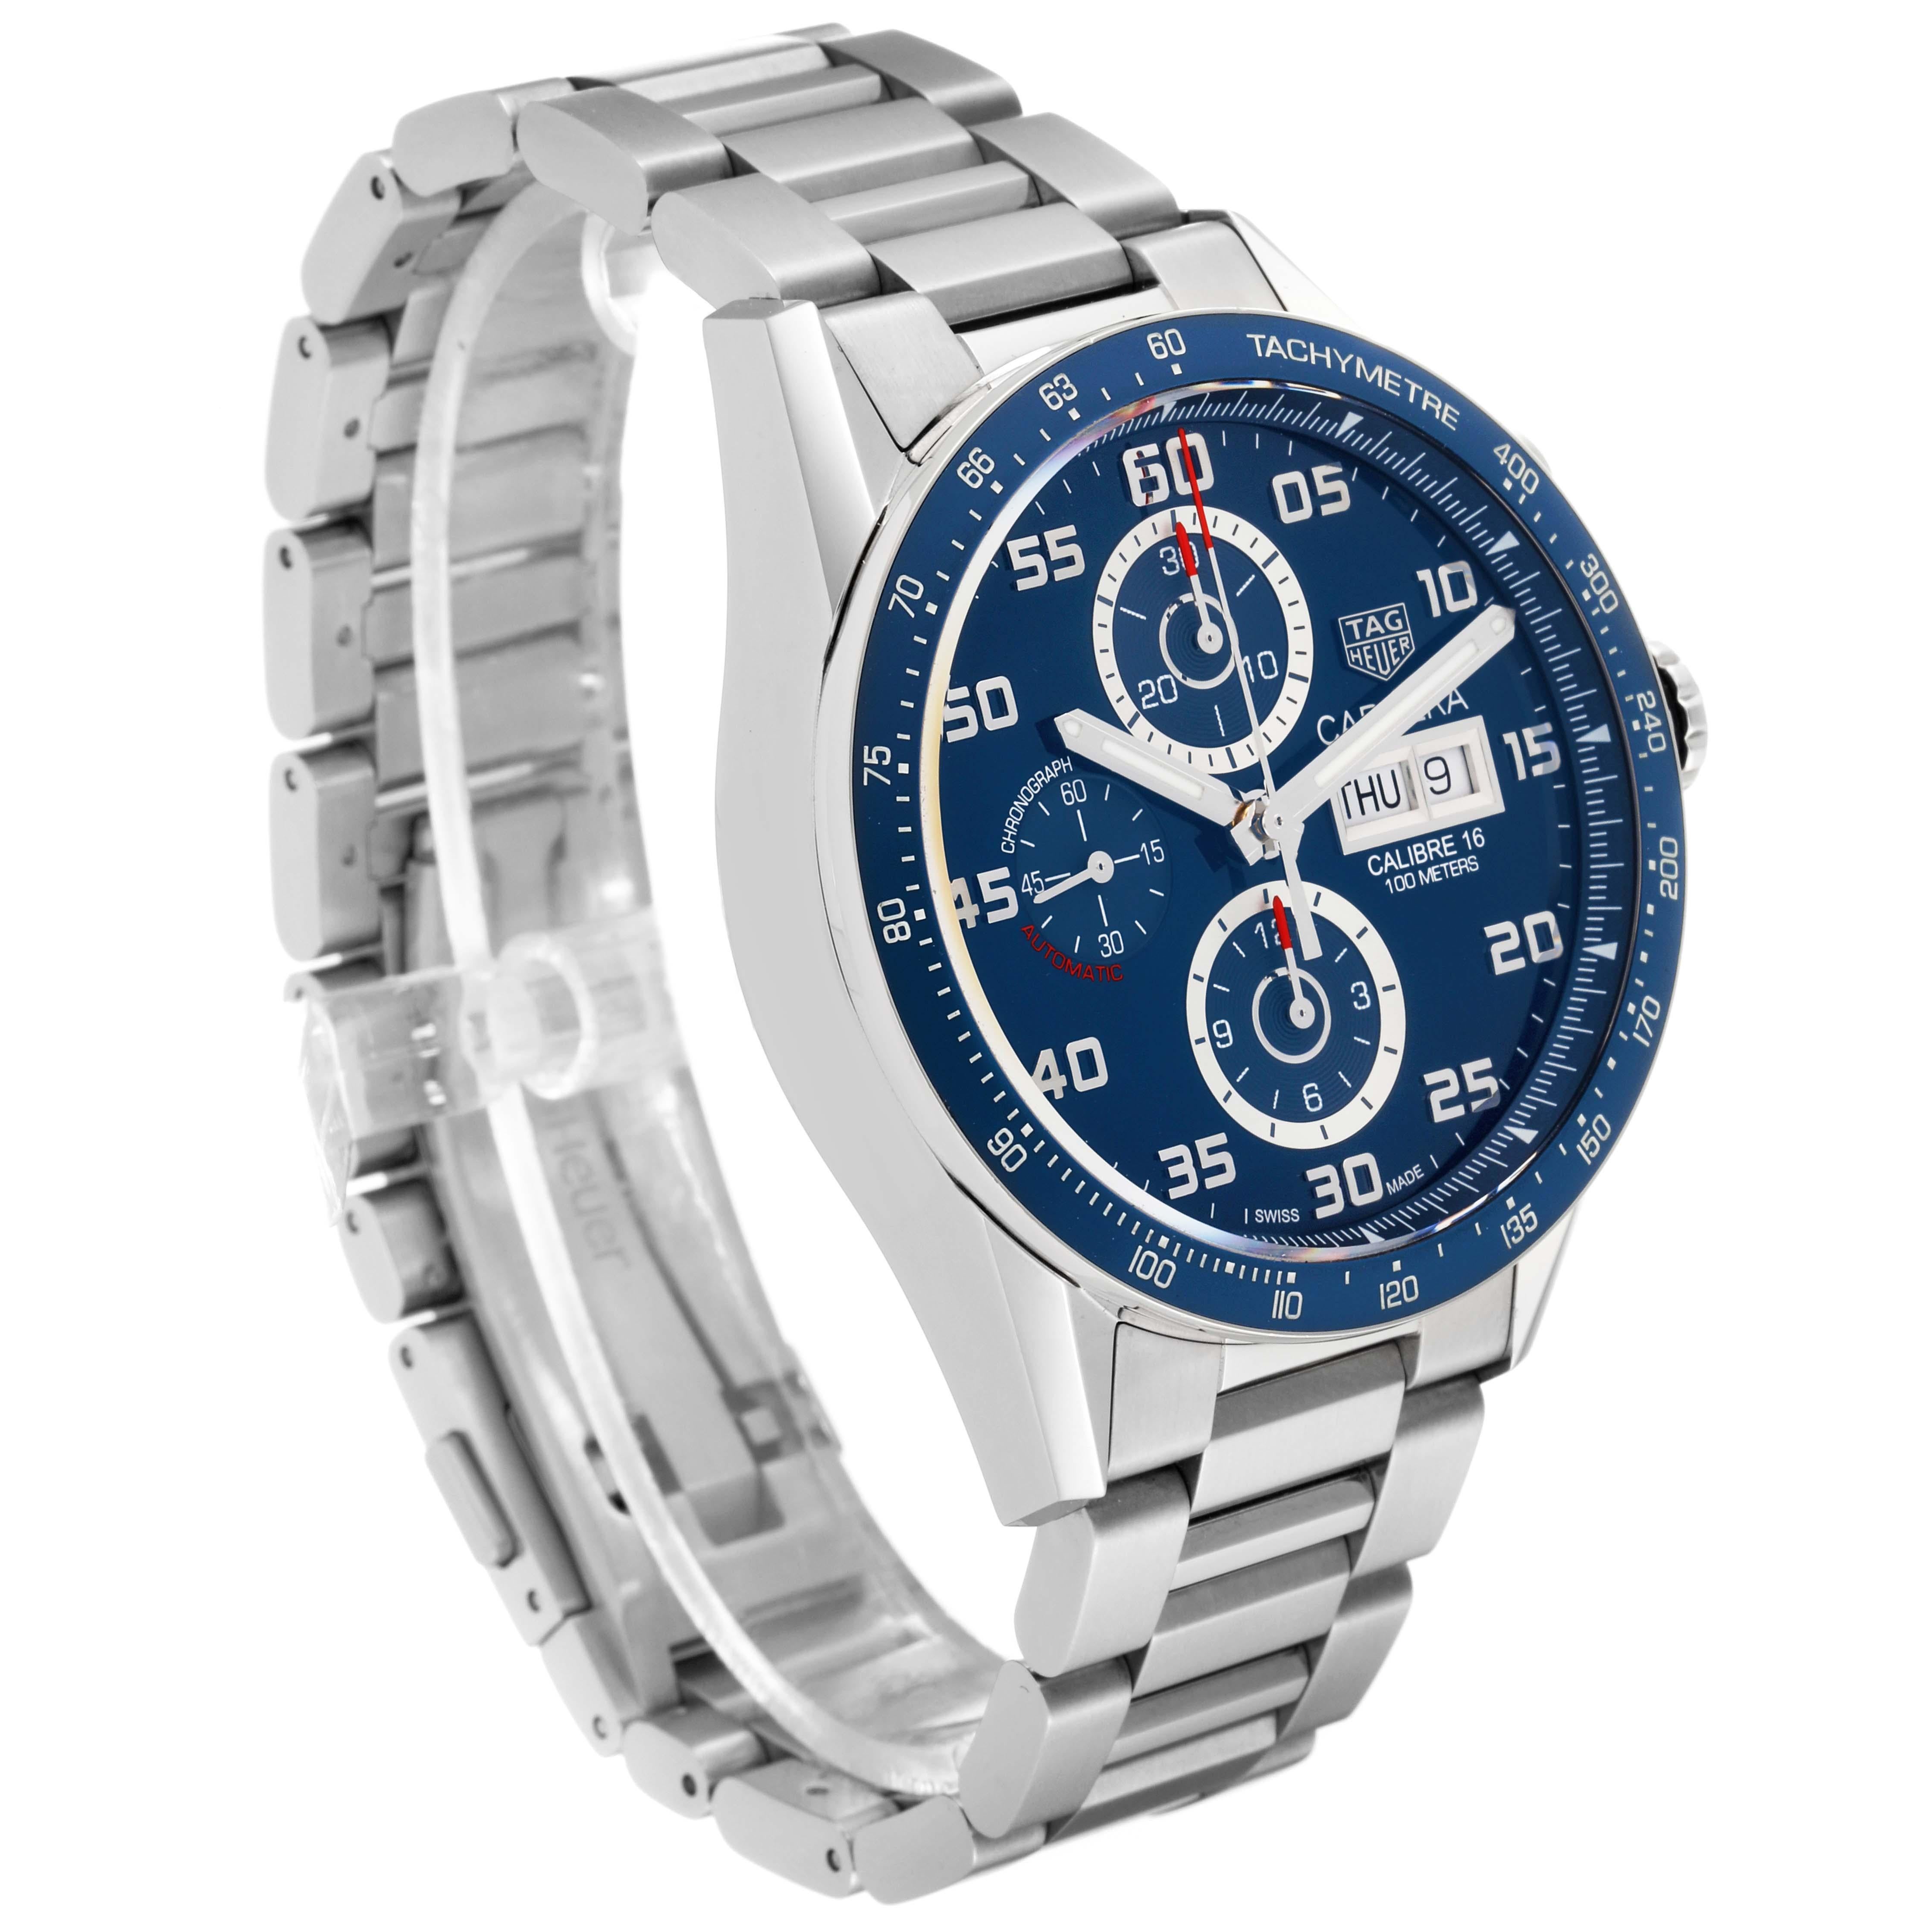 Tag Heuer Carrera Blue Dial Chronograph Steel Mens Watch CV2A1V Box Card. Automatic self-winding chronograph movement. Stainless steel case 43.0 mm. Case thickness: 16.85 mm.Transparent exhibition sapphire crystal caseback. Blue ceramic bezel with